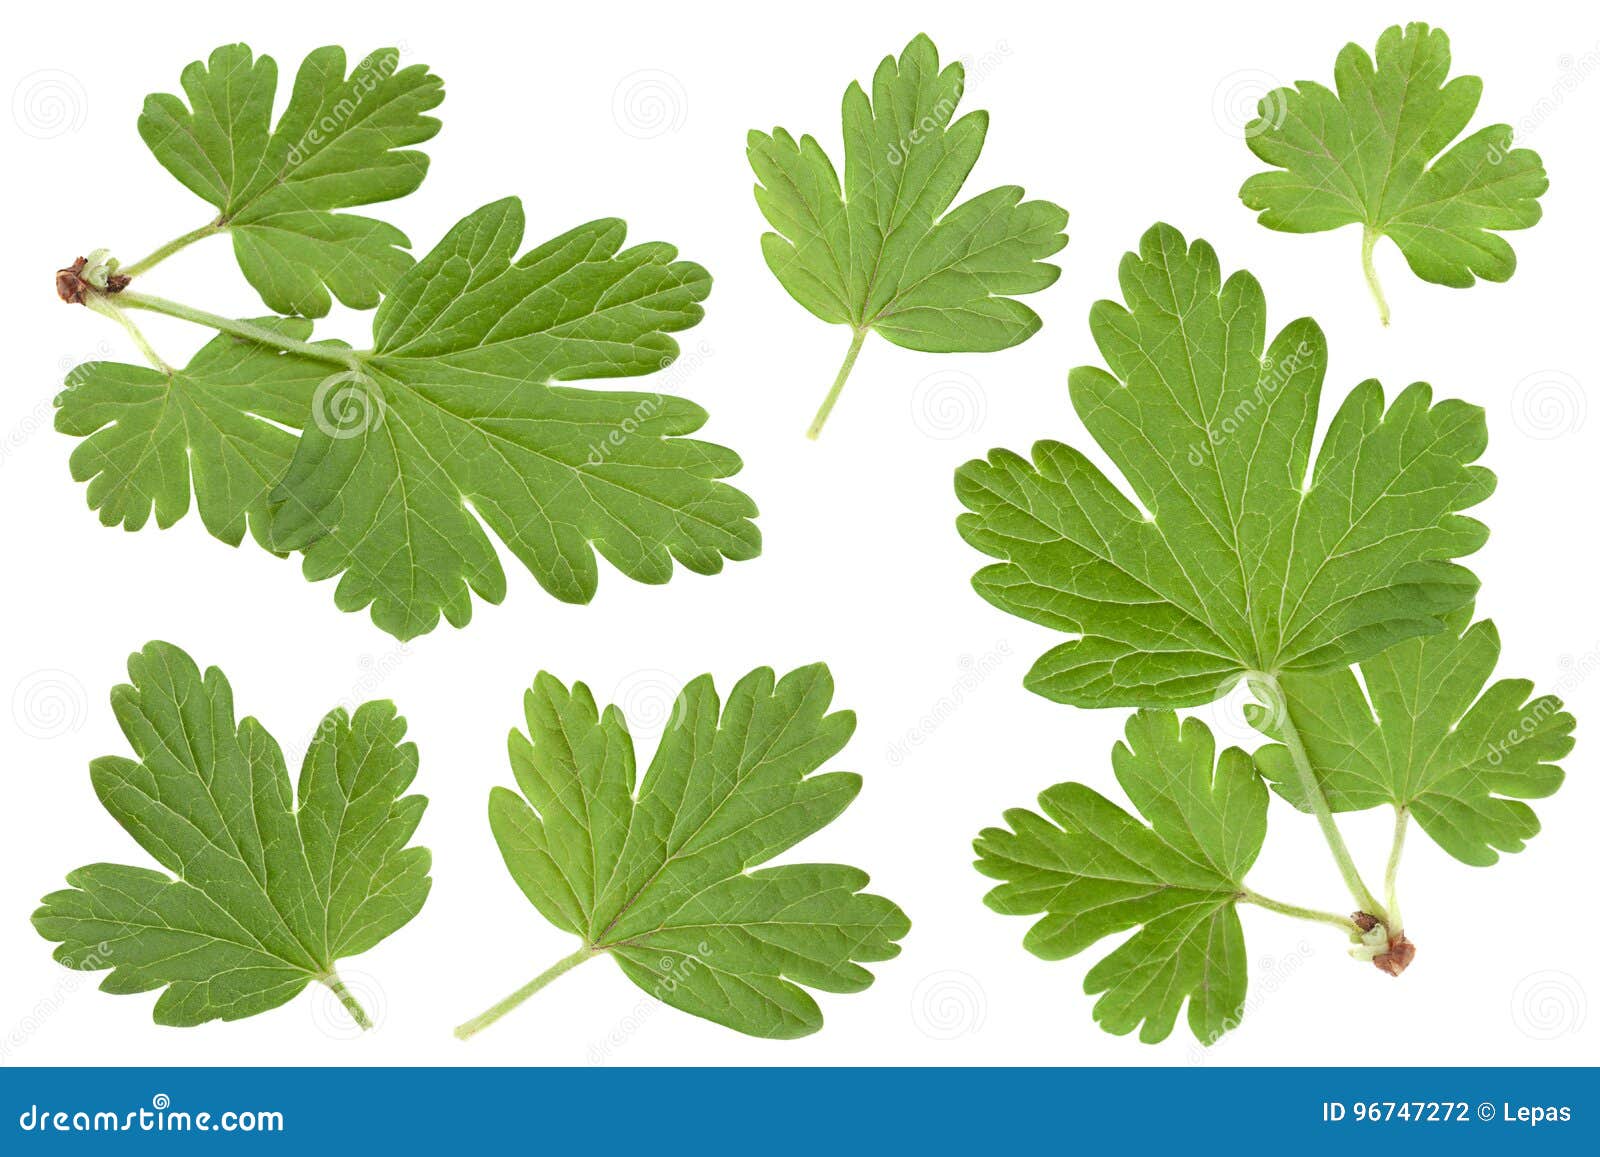 Gooseberry Leaf Collection on White Stock Photo - Image of leave ...